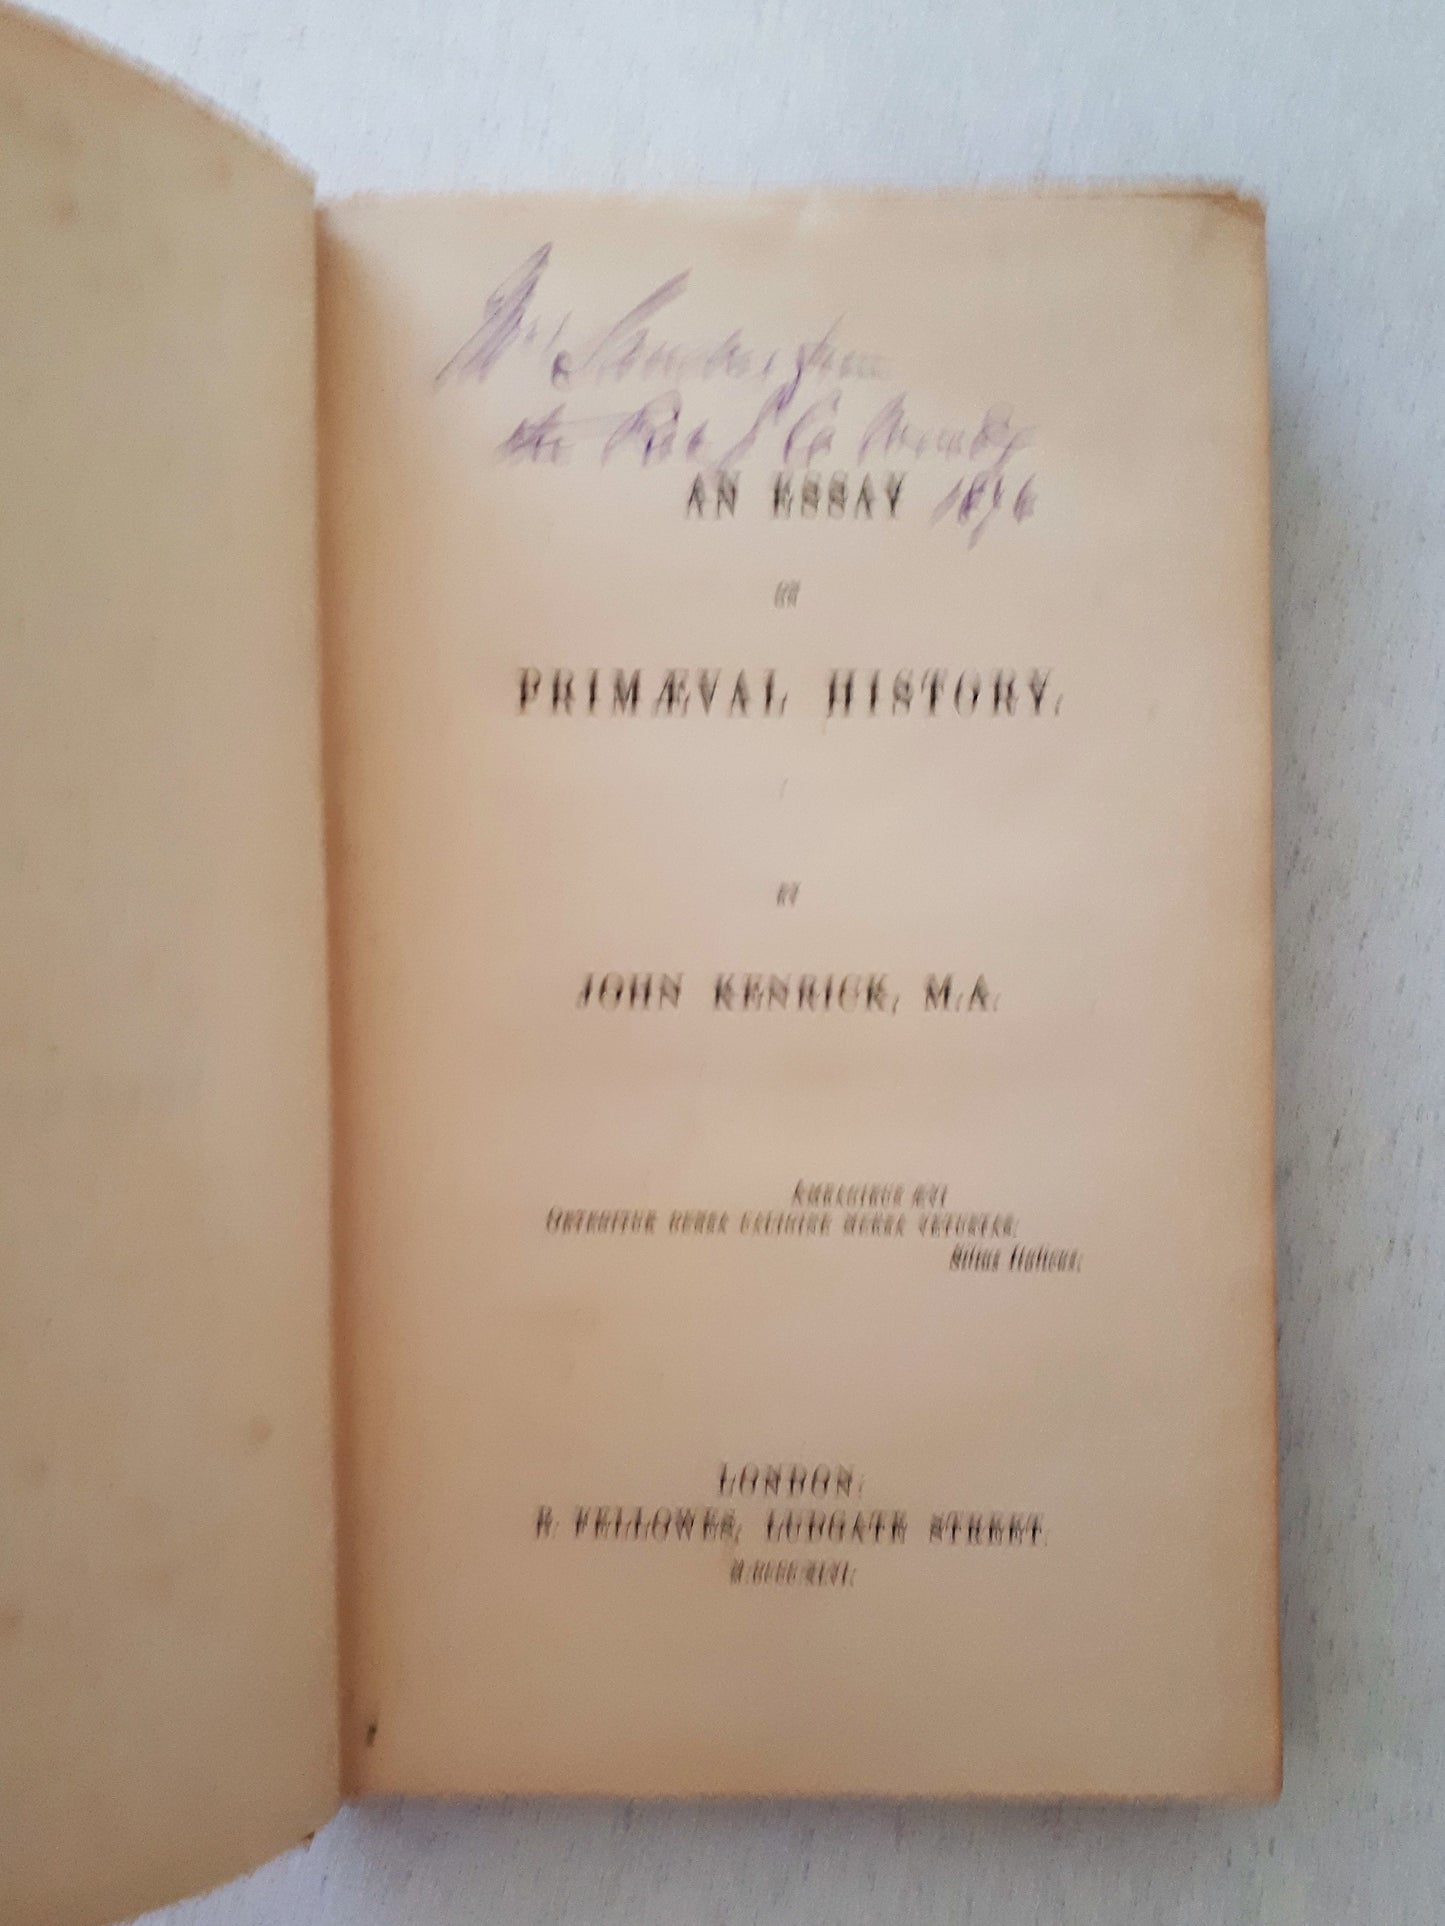 An Essay on Primaeval History by John Kenrick